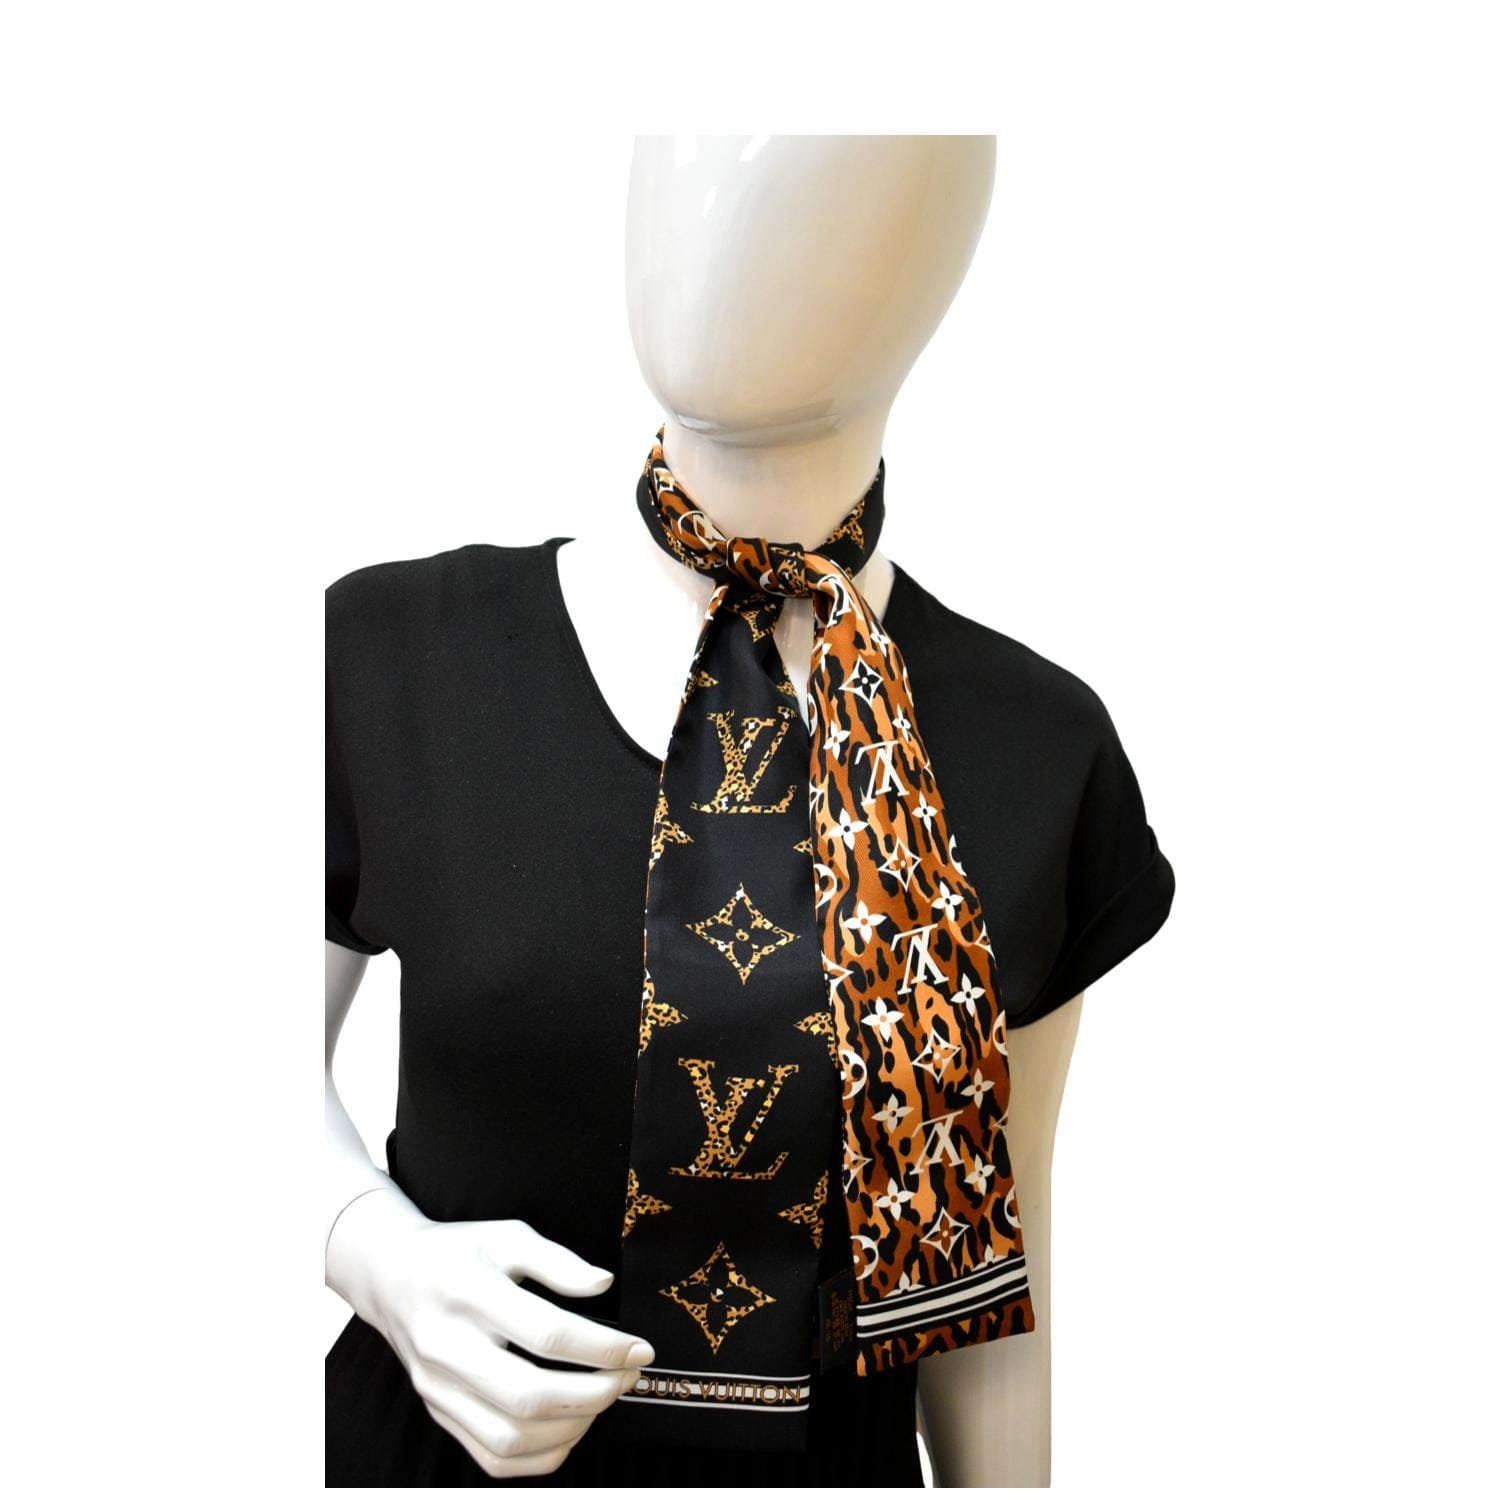 How to accessorize your bag with a scarf  Louis vuitton bandeau, Louis  vuitton, Louis vuitton handbags black